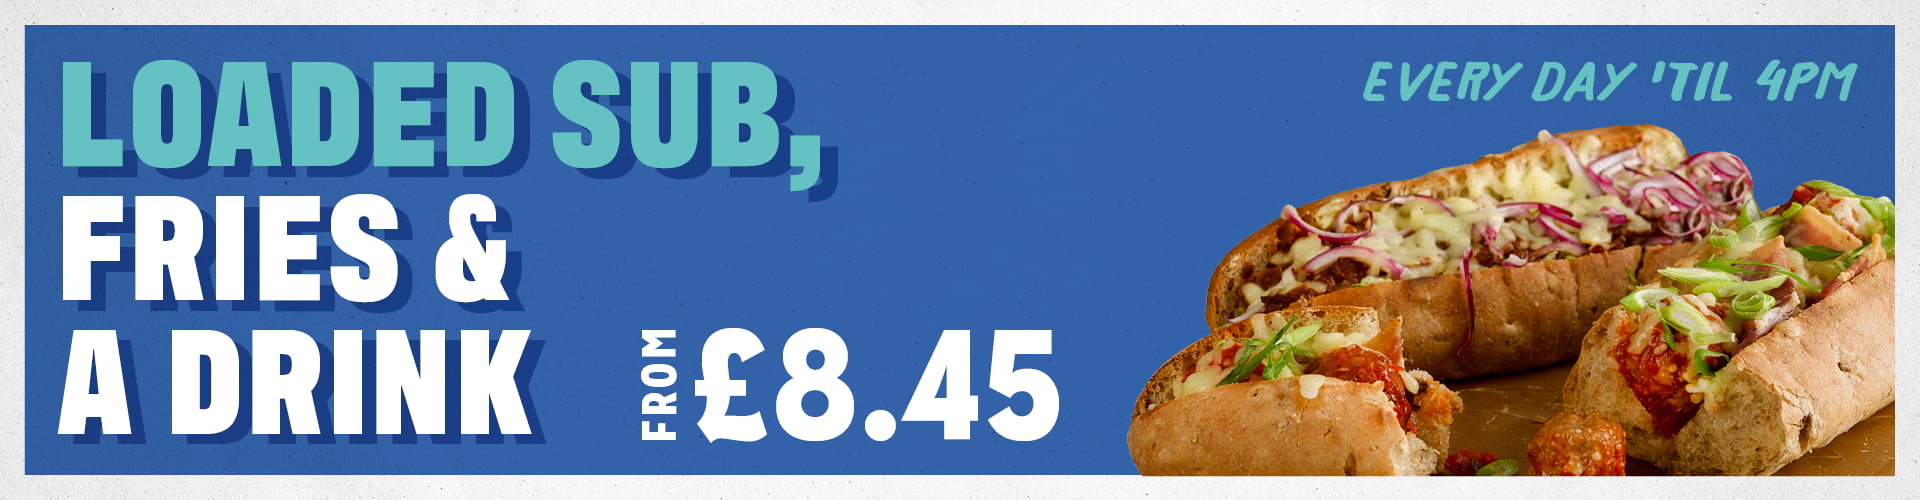 Loaded Sub, Fries & A Drink - From £8.45. Every Day Til 4pm.